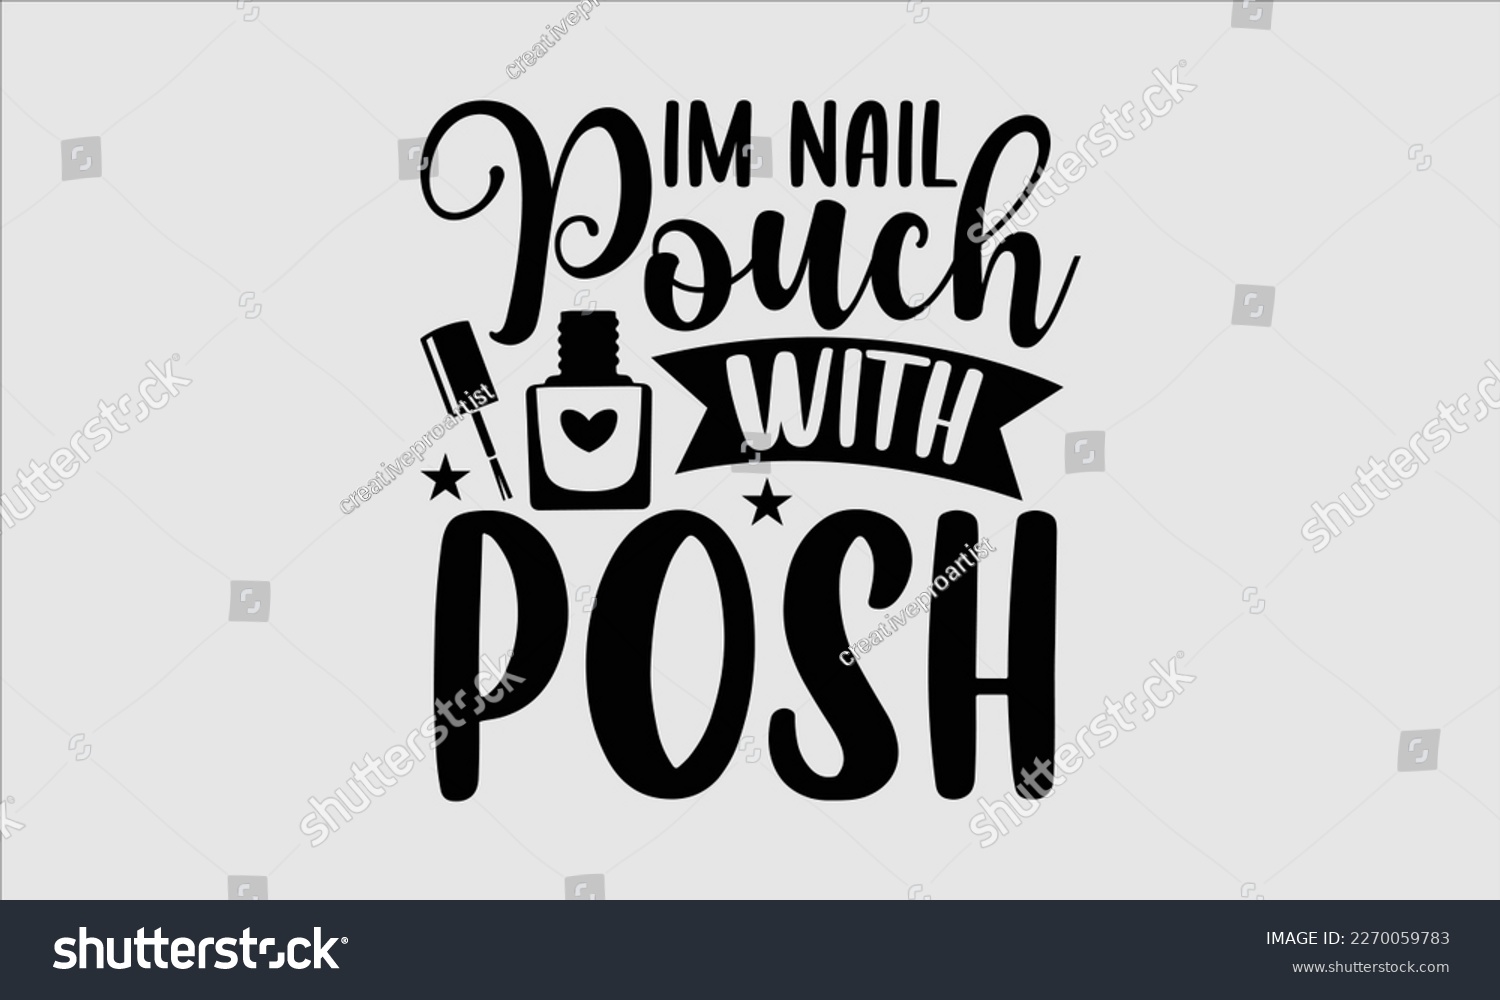 SVG of Im nail pouch with posh- Nail Tech t shirts design, Hand written lettering phrase, Isolated on white background,  Calligraphy graphic for Cutting Machine, svg eps 10. svg